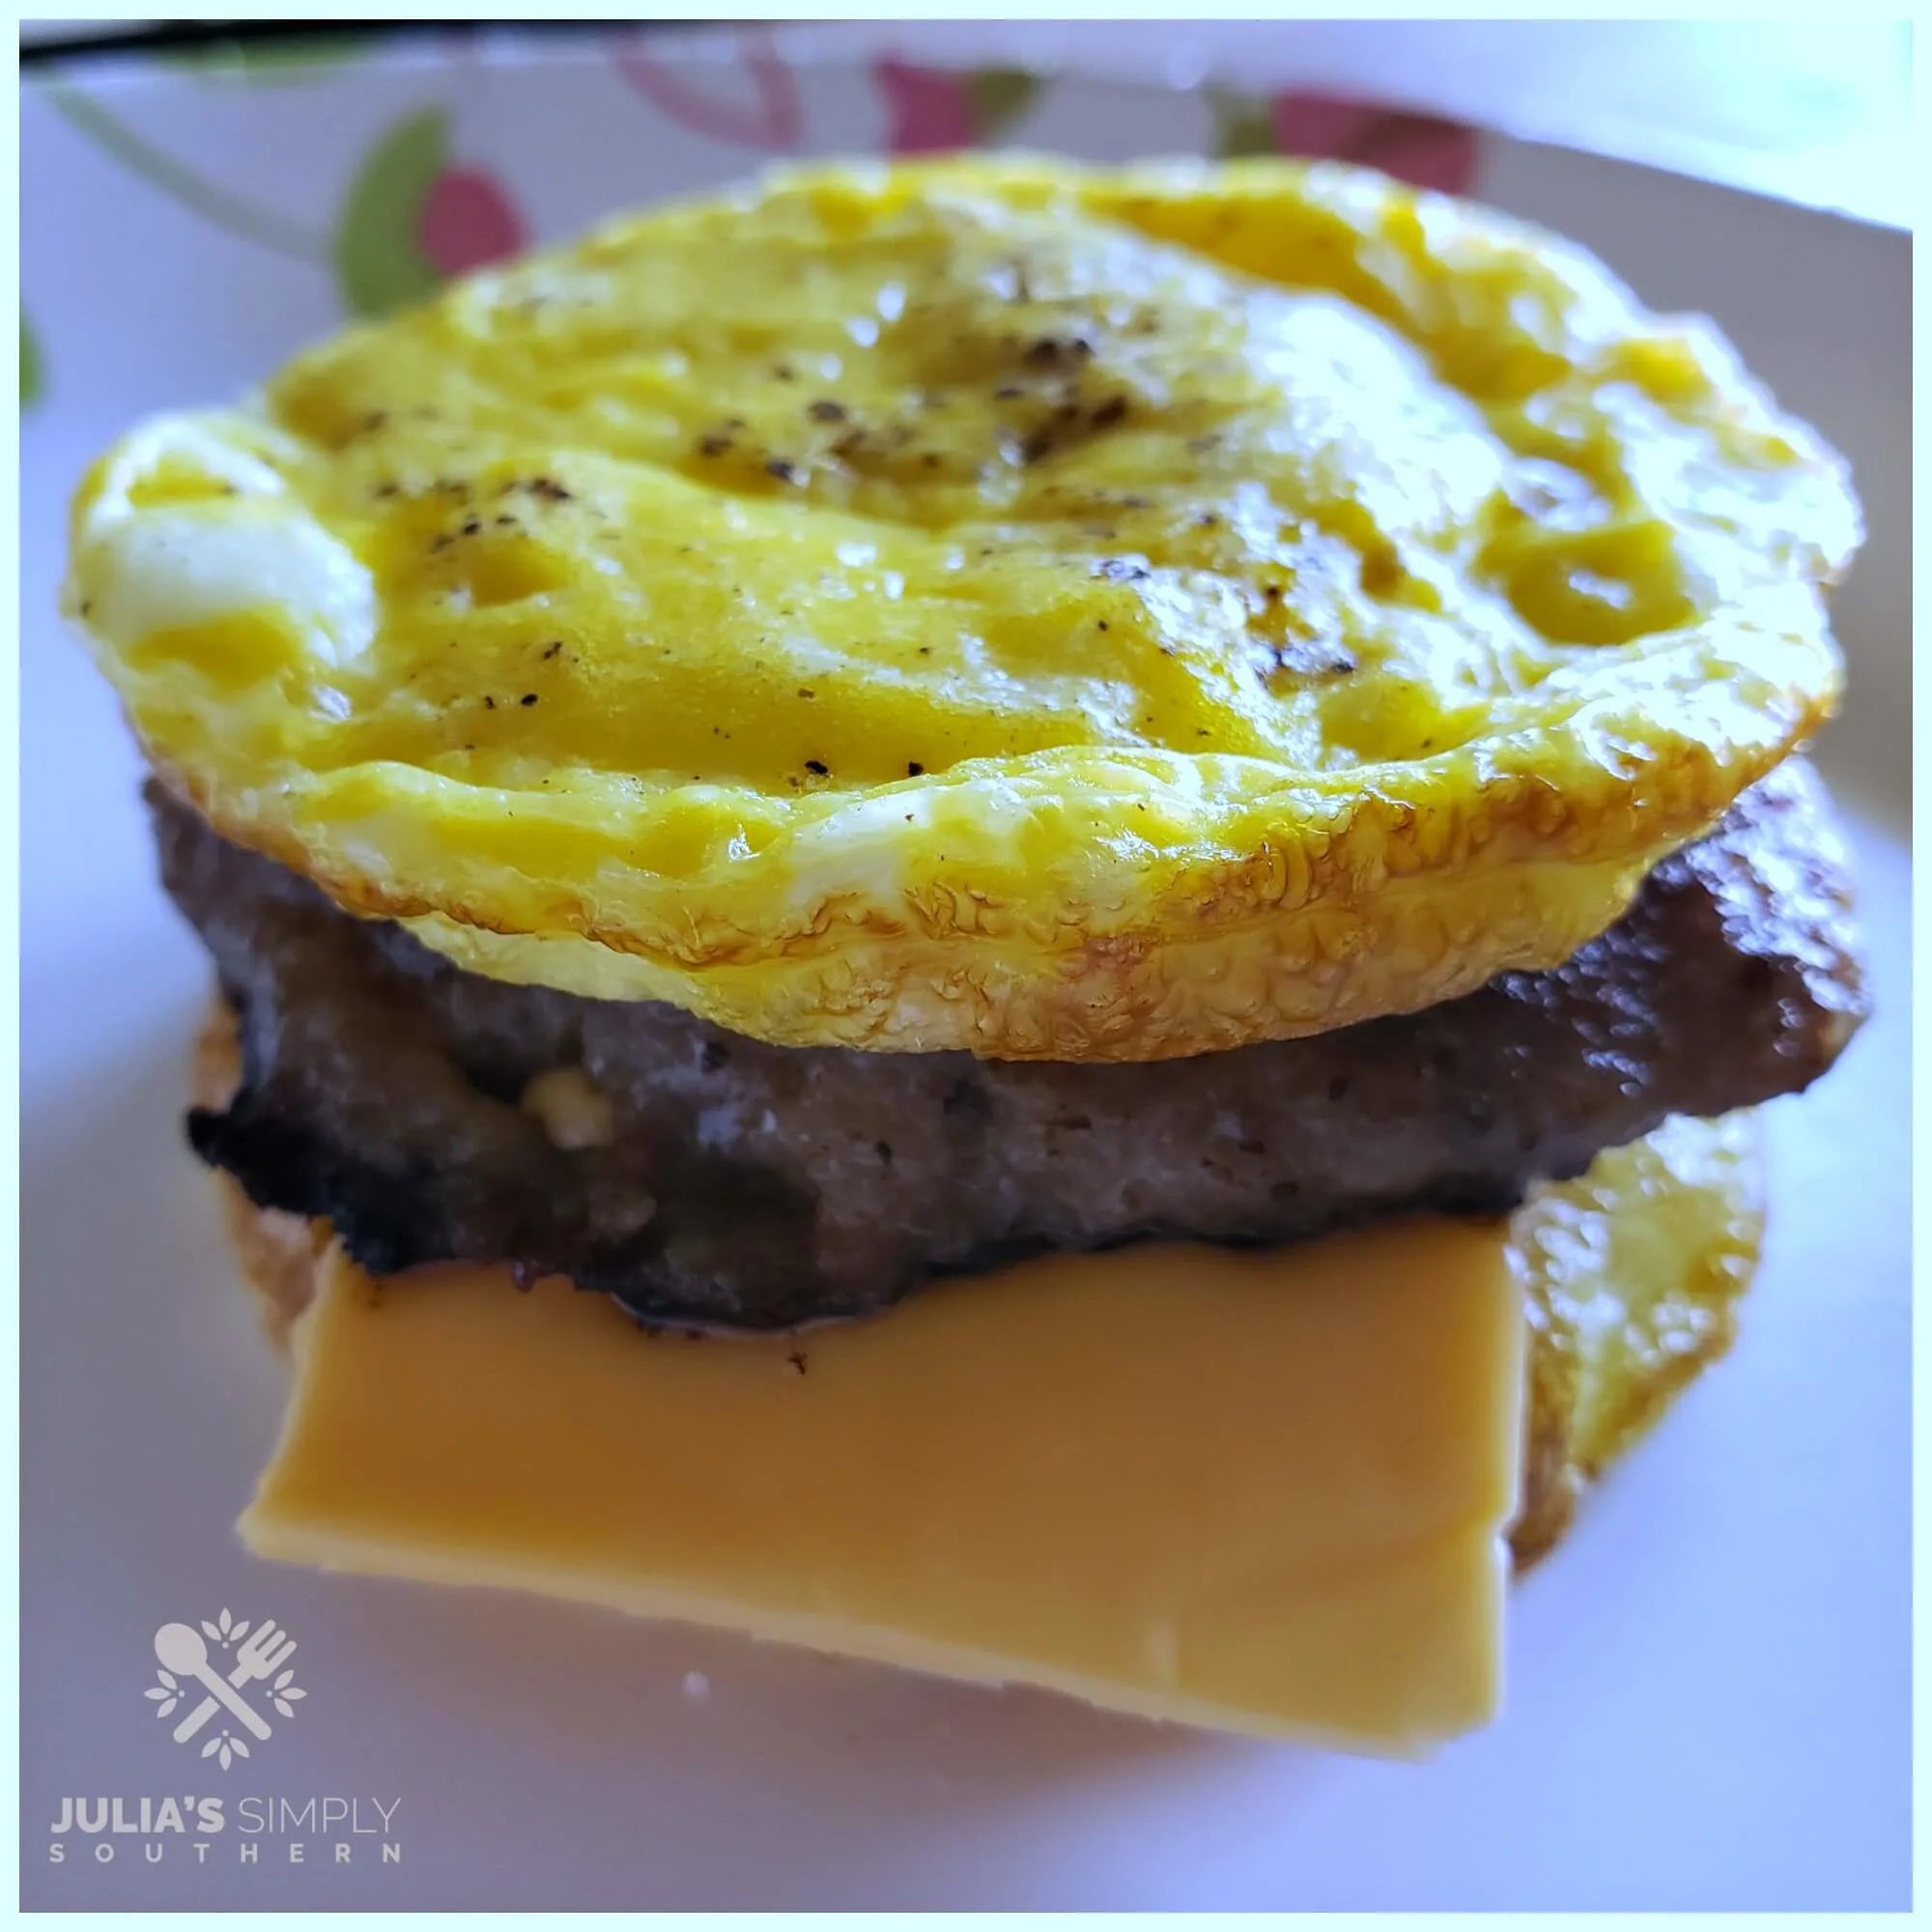 Delicious Low Carb Breakfast Recipes - Muffin style breakfast sandwiches